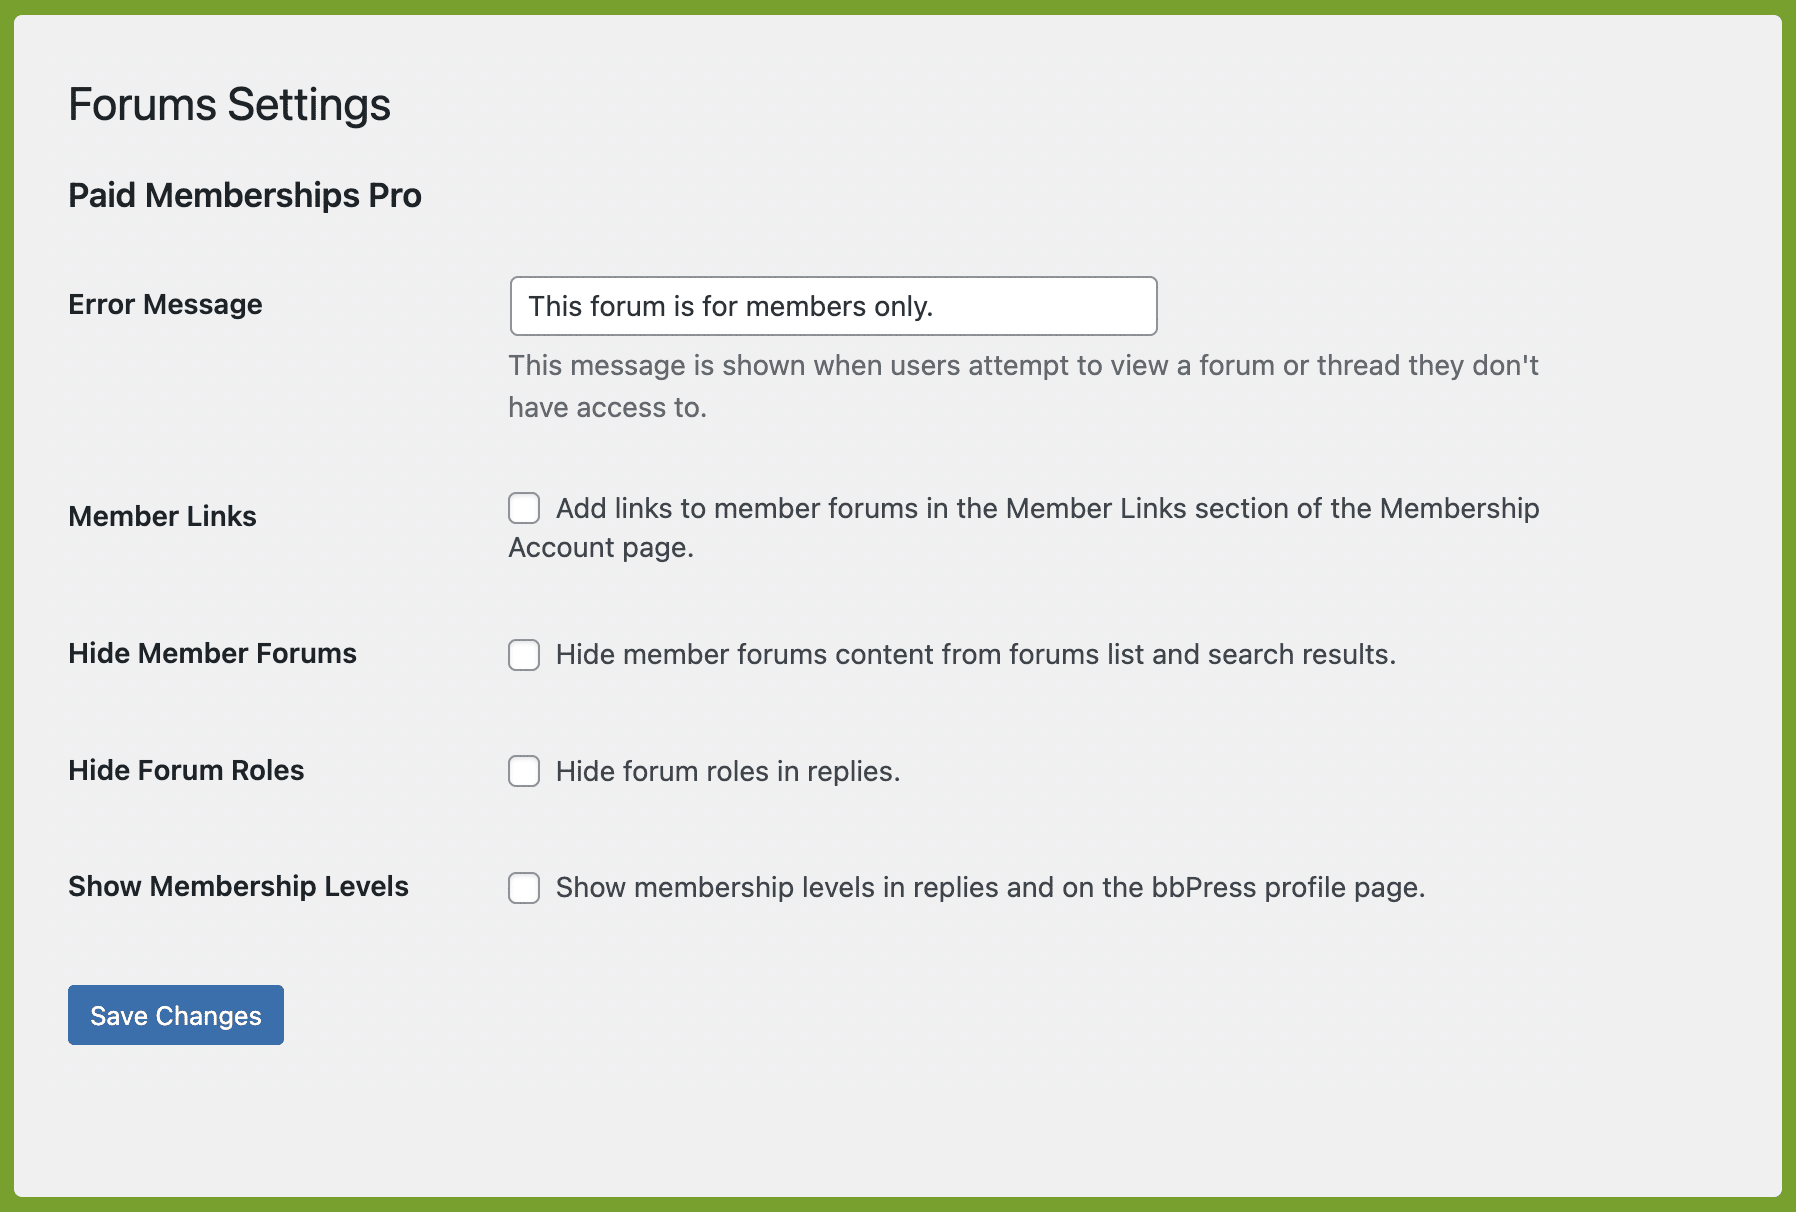 Additional Private Forum Settings on the Settings > Forums screen in the WordPress admin.